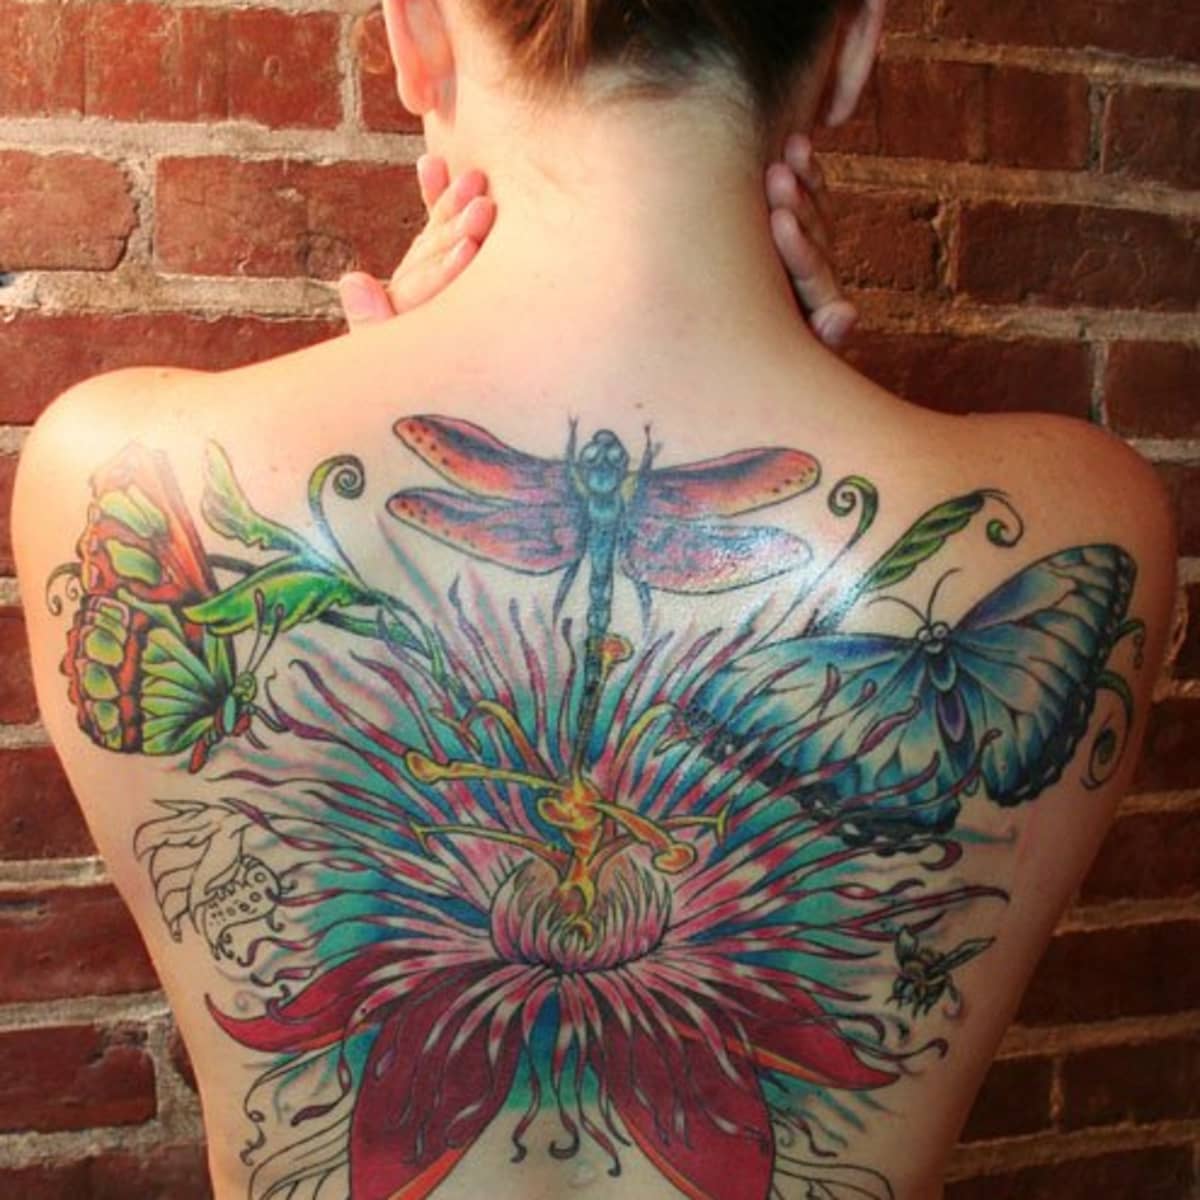 Tattoo uploaded by Ann Volquarts  4d Butterfly and dragonfly tattoo   Tattoodo